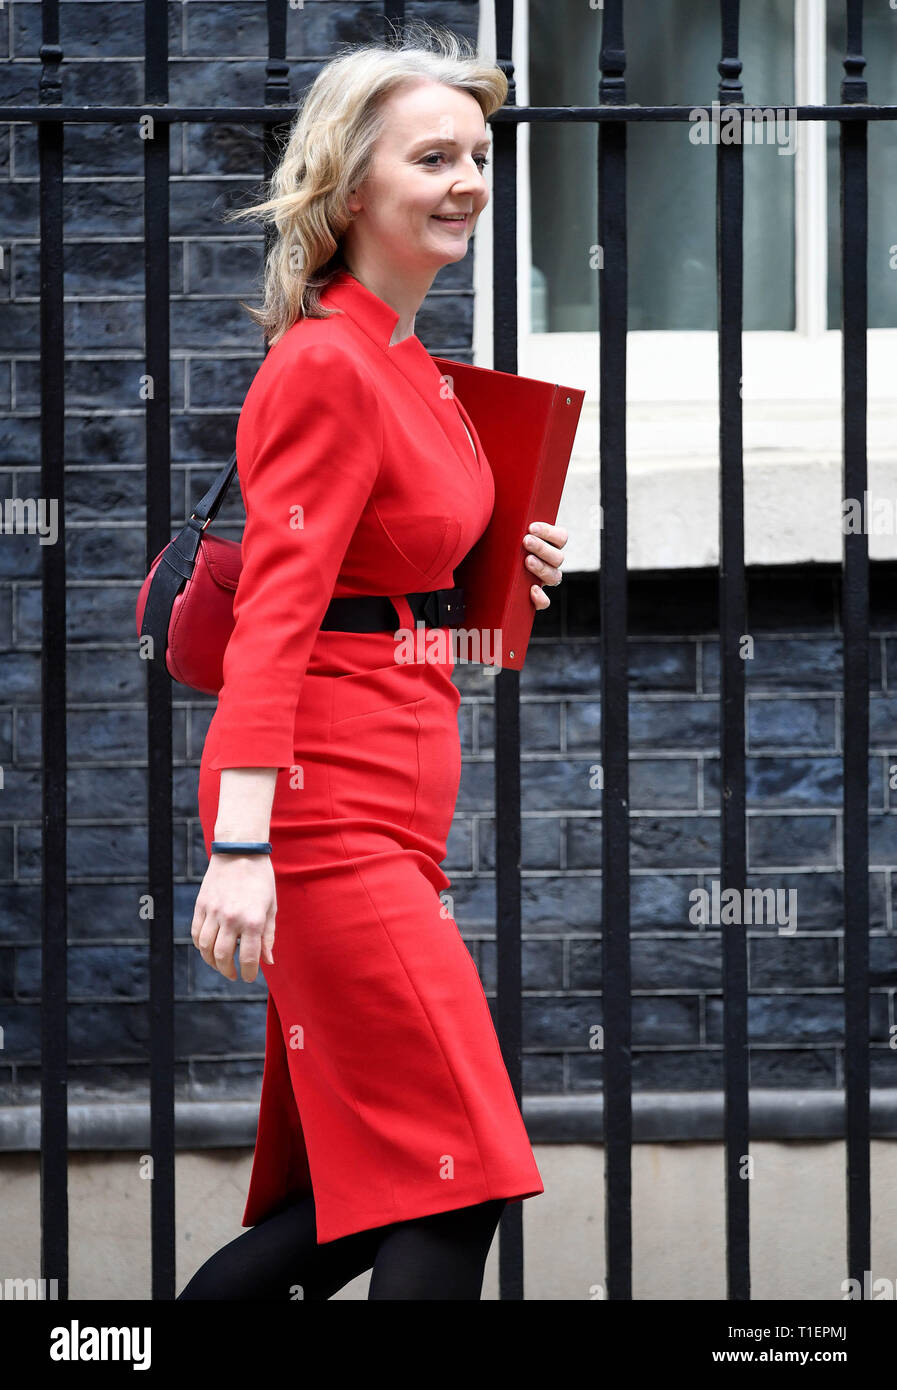 London, United Kingdom. 26th Mar, 2019. Cabinet Meeting. Members of Theresa May's Government attend the weekly Cabinet meeting inside Number 10 Downing Street. Elizabeth Truss MP Chief Secretary to the Treasury leaving Number 10. Picture by Credit: andrew parsons/Alamy Live News Stock Photo